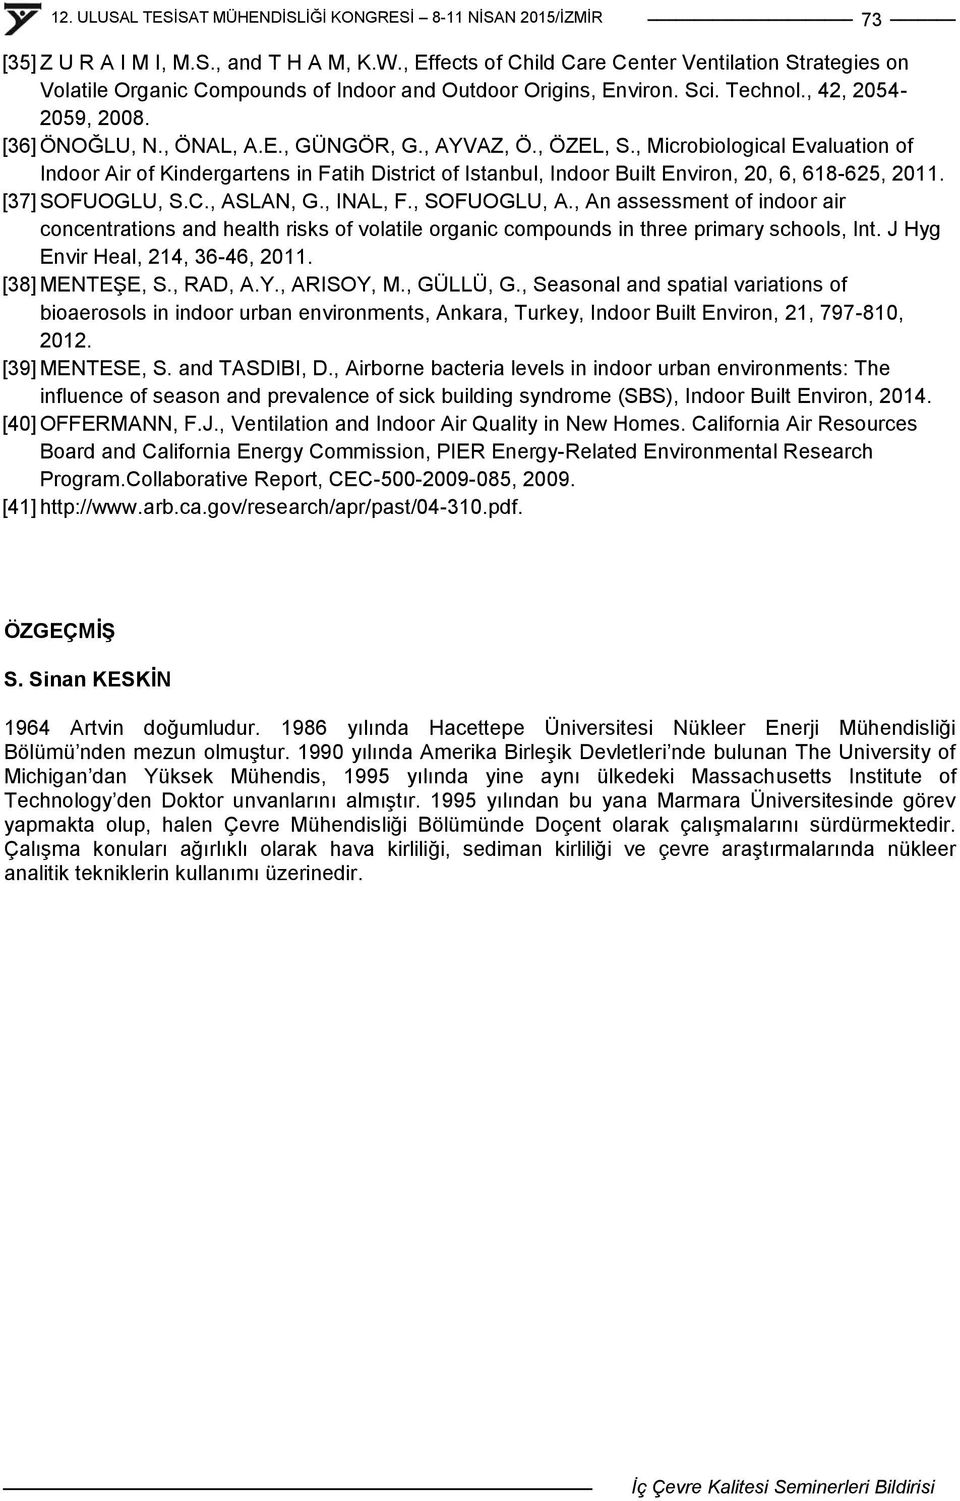 , Microbiological Evaluation of Indoor Air of Kindergartens in Fatih District of Istanbul, Indoor Built Environ, 20, 6, 618-625, 2011. [37] SOFUOGLU, S.C., ASLAN, G., INAL, F., SOFUOGLU, A.